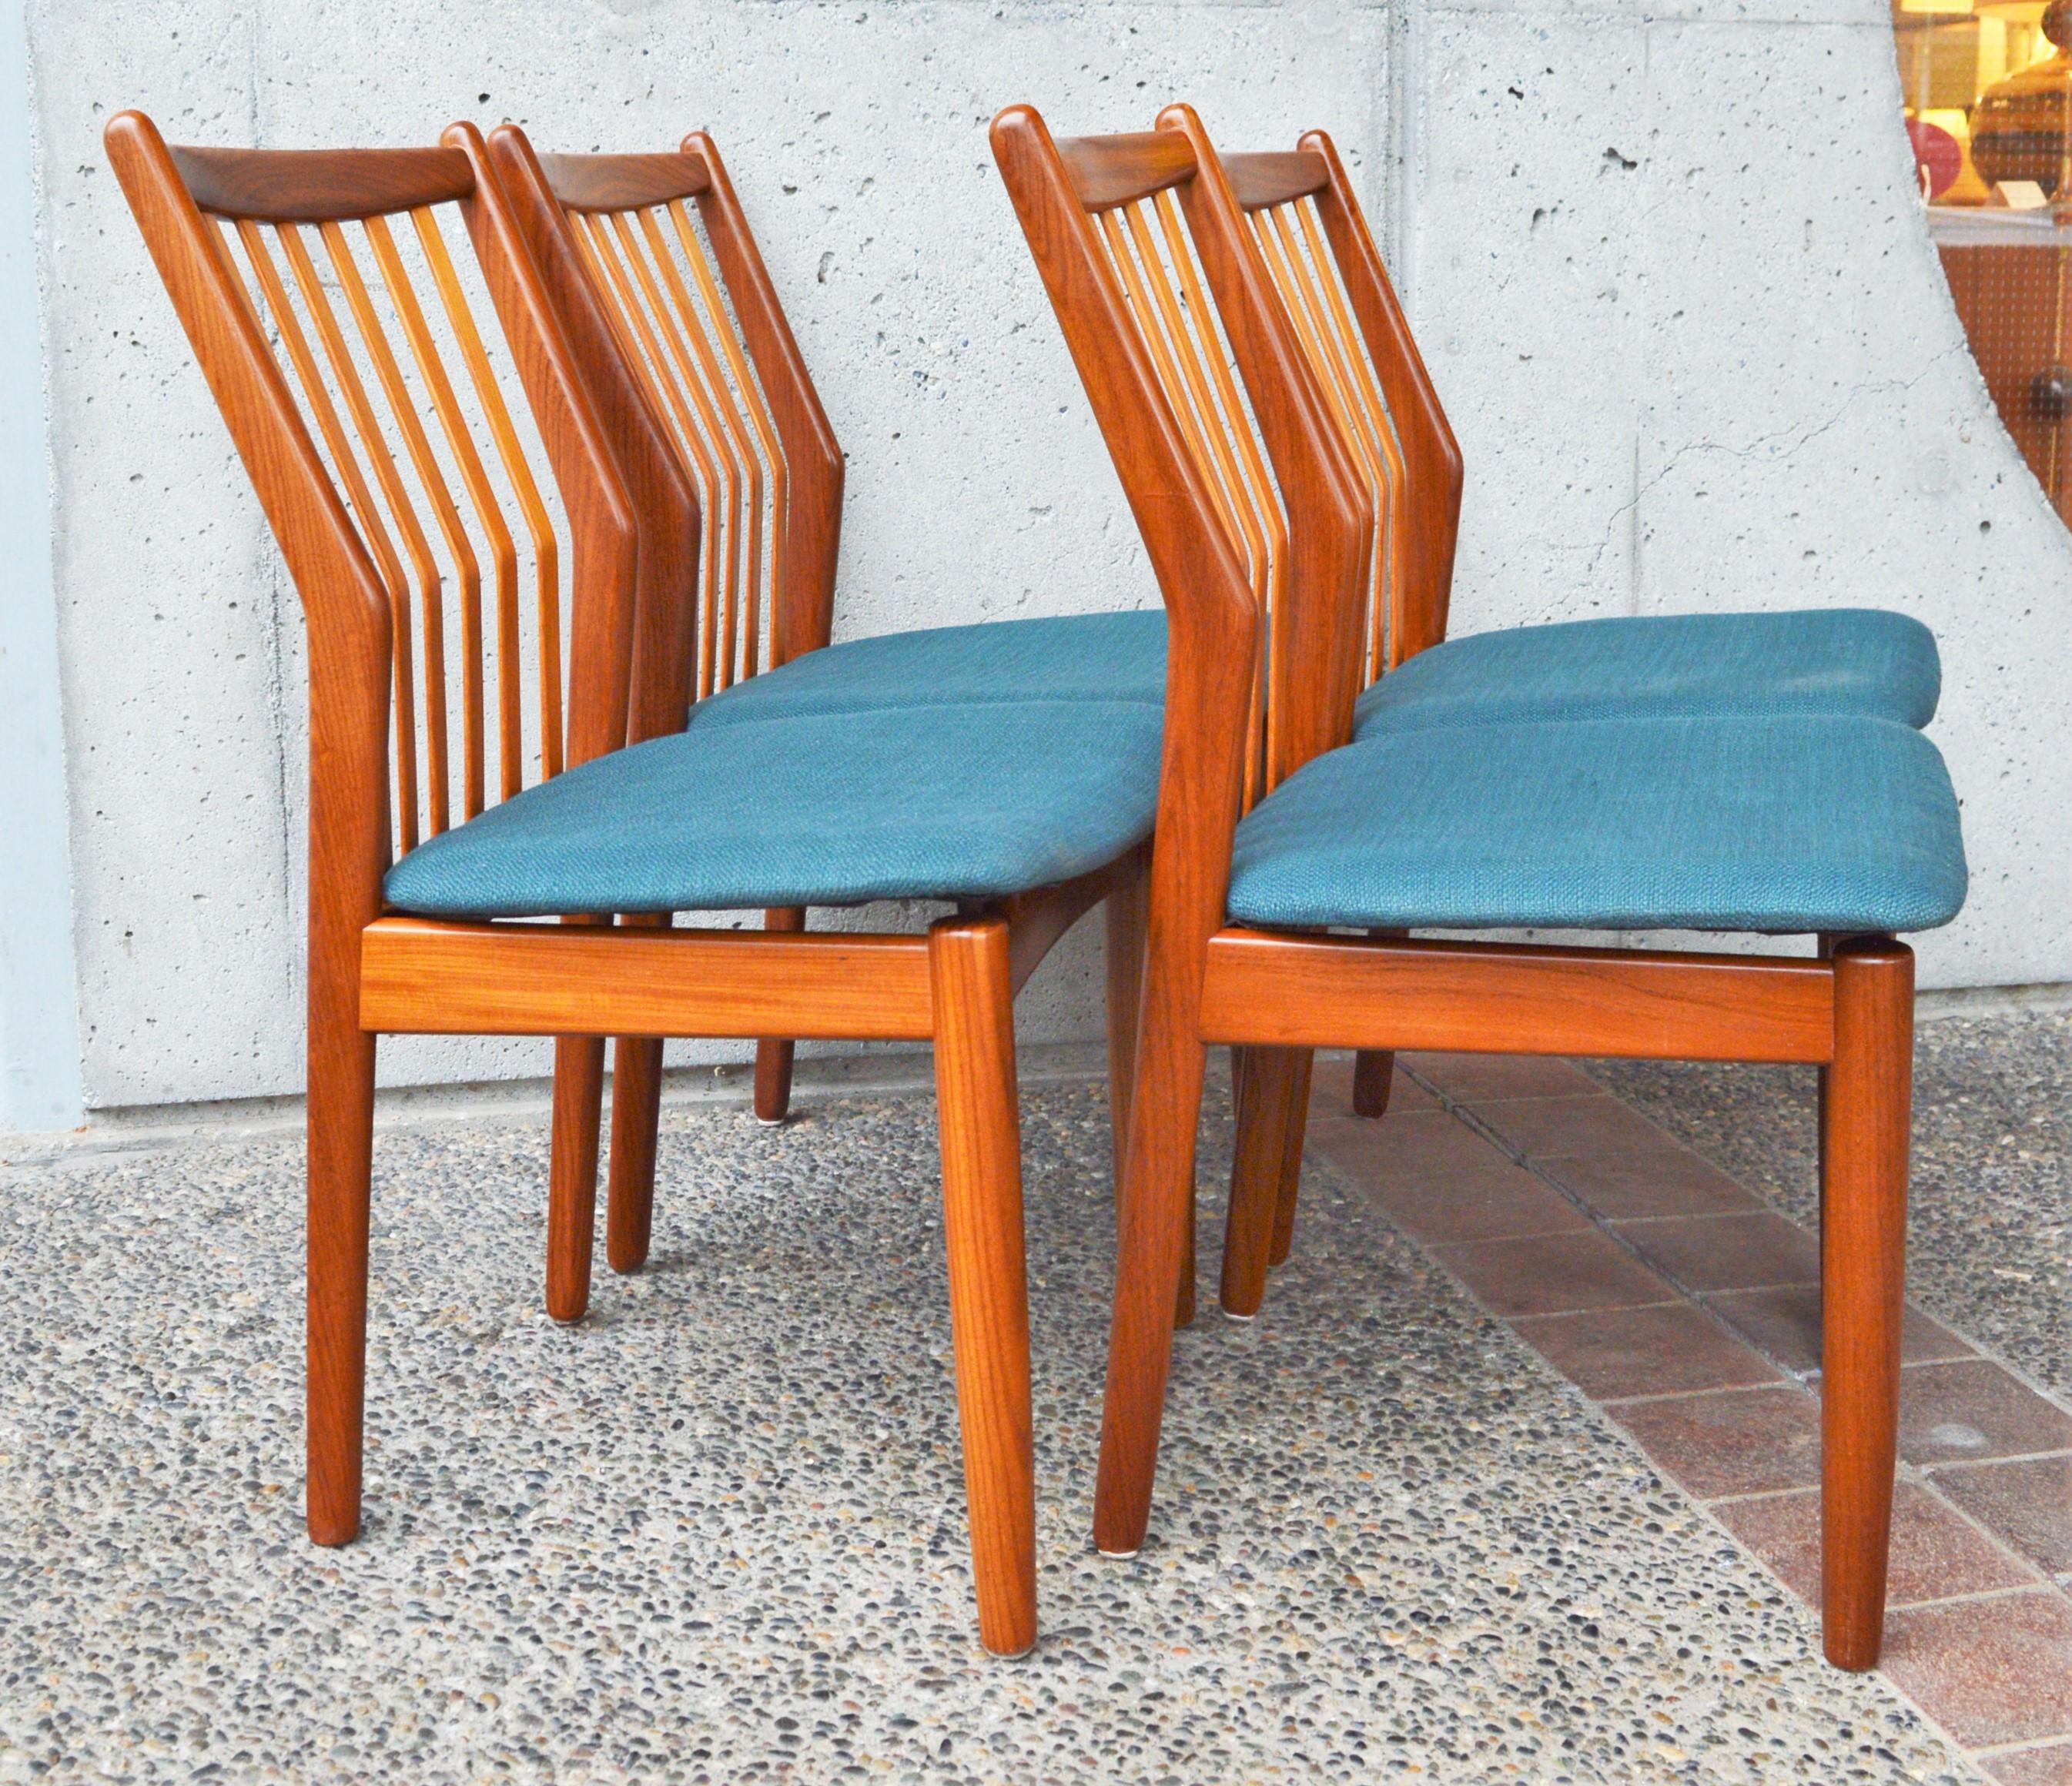 Svend Madsen Set of 4 Danish Teak Dining Chairs with Bent Backs & New Teal Tweed For Sale 6